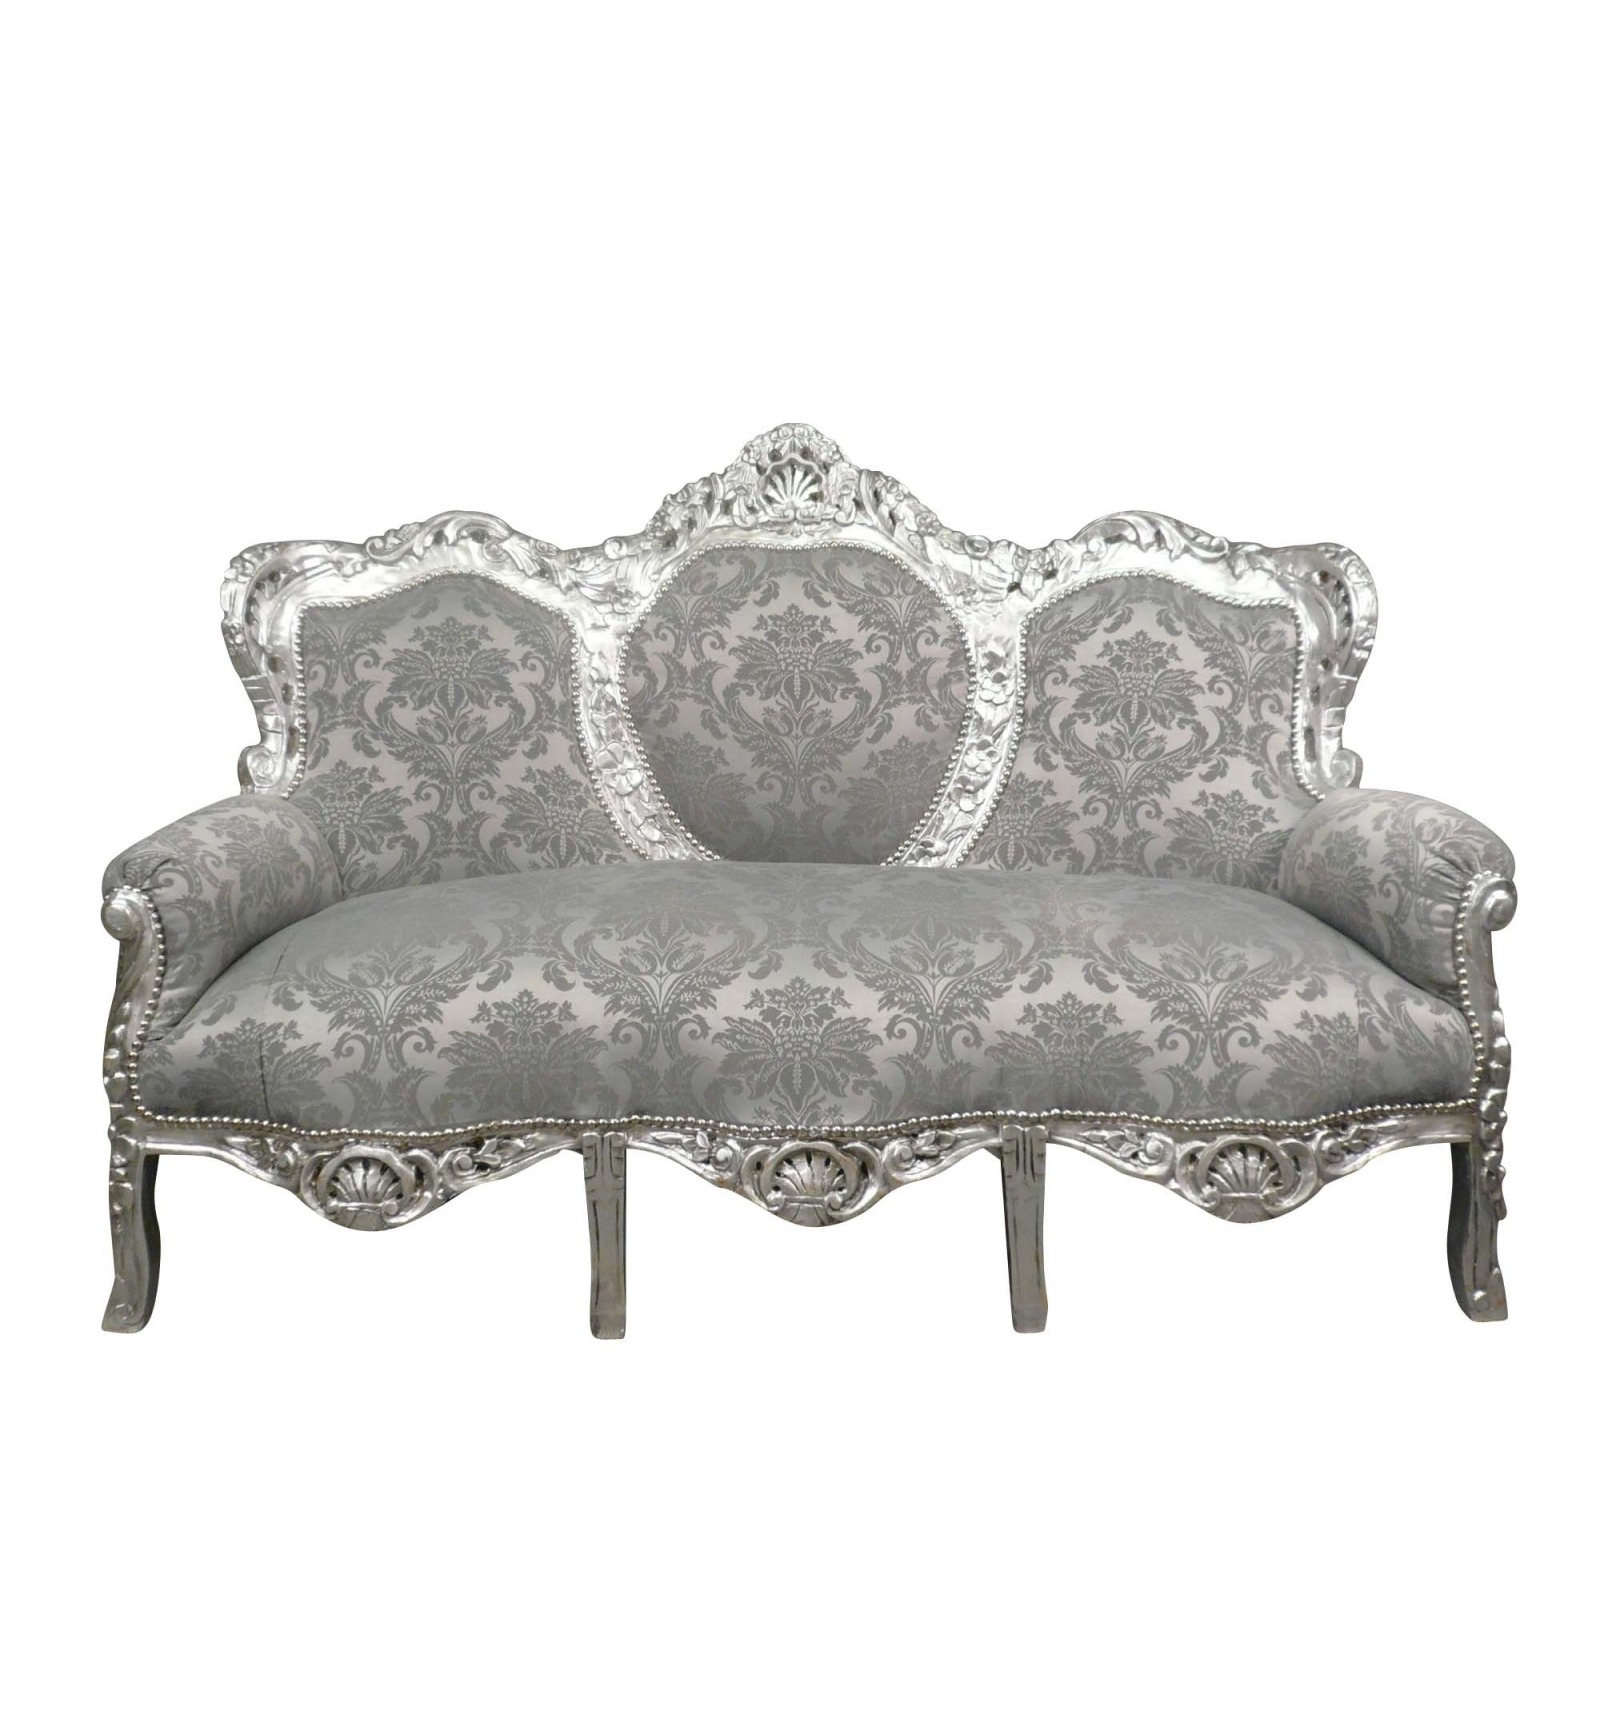 Baroque armchair Louis XVI style with white floral fabric, black wood